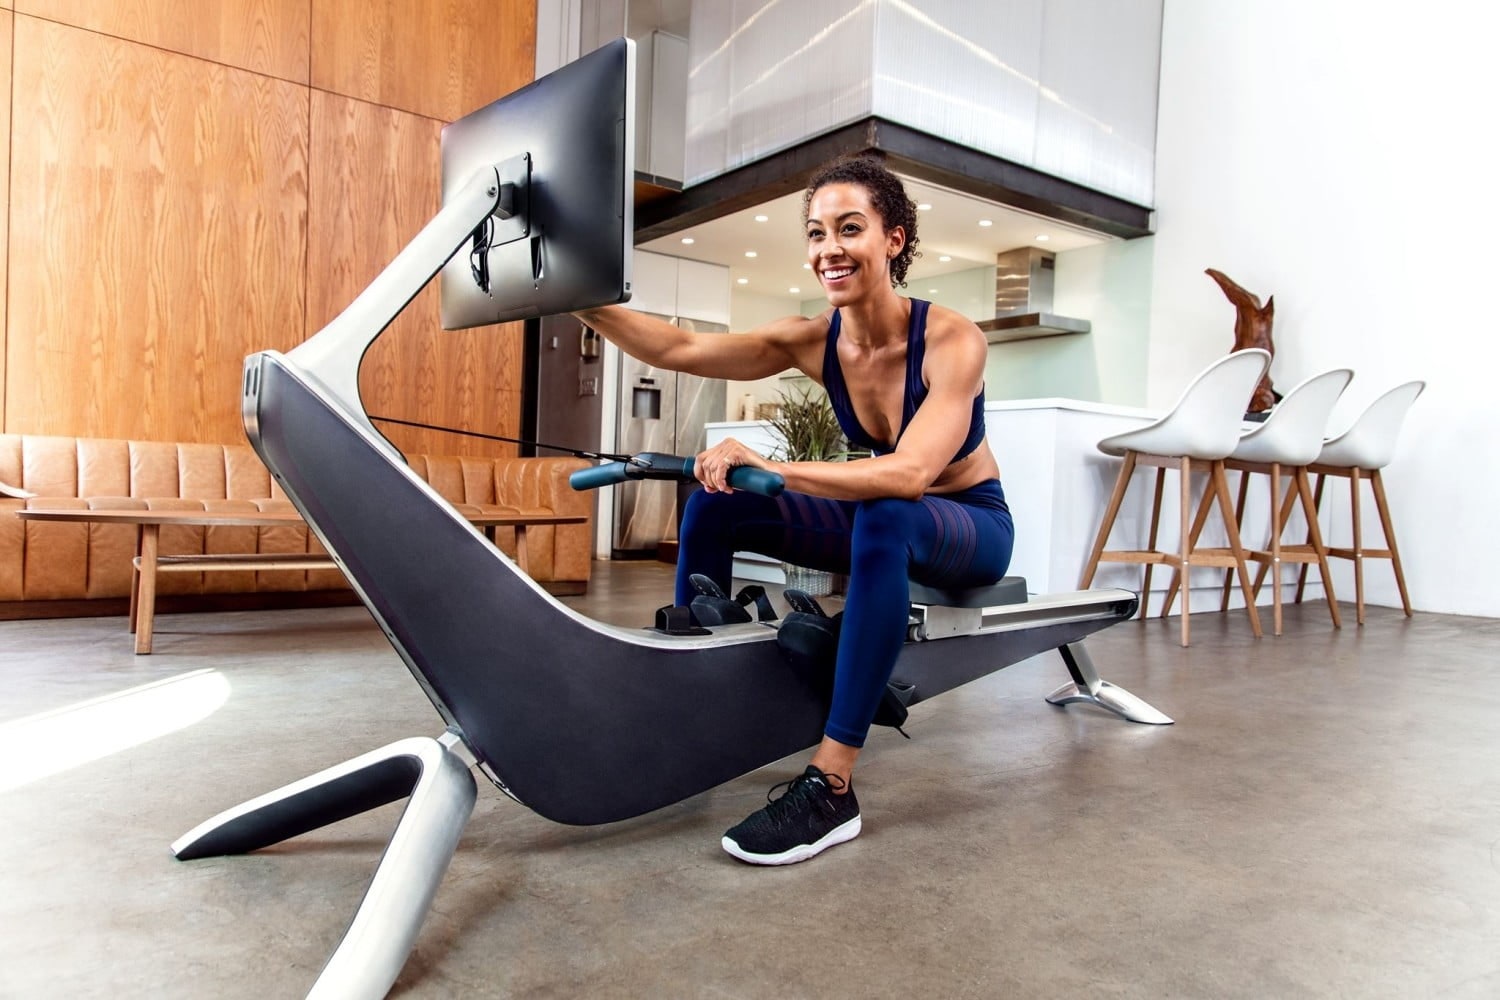 This In vogue Rowing Machine Is Providing a Sweet Labor Day Deal